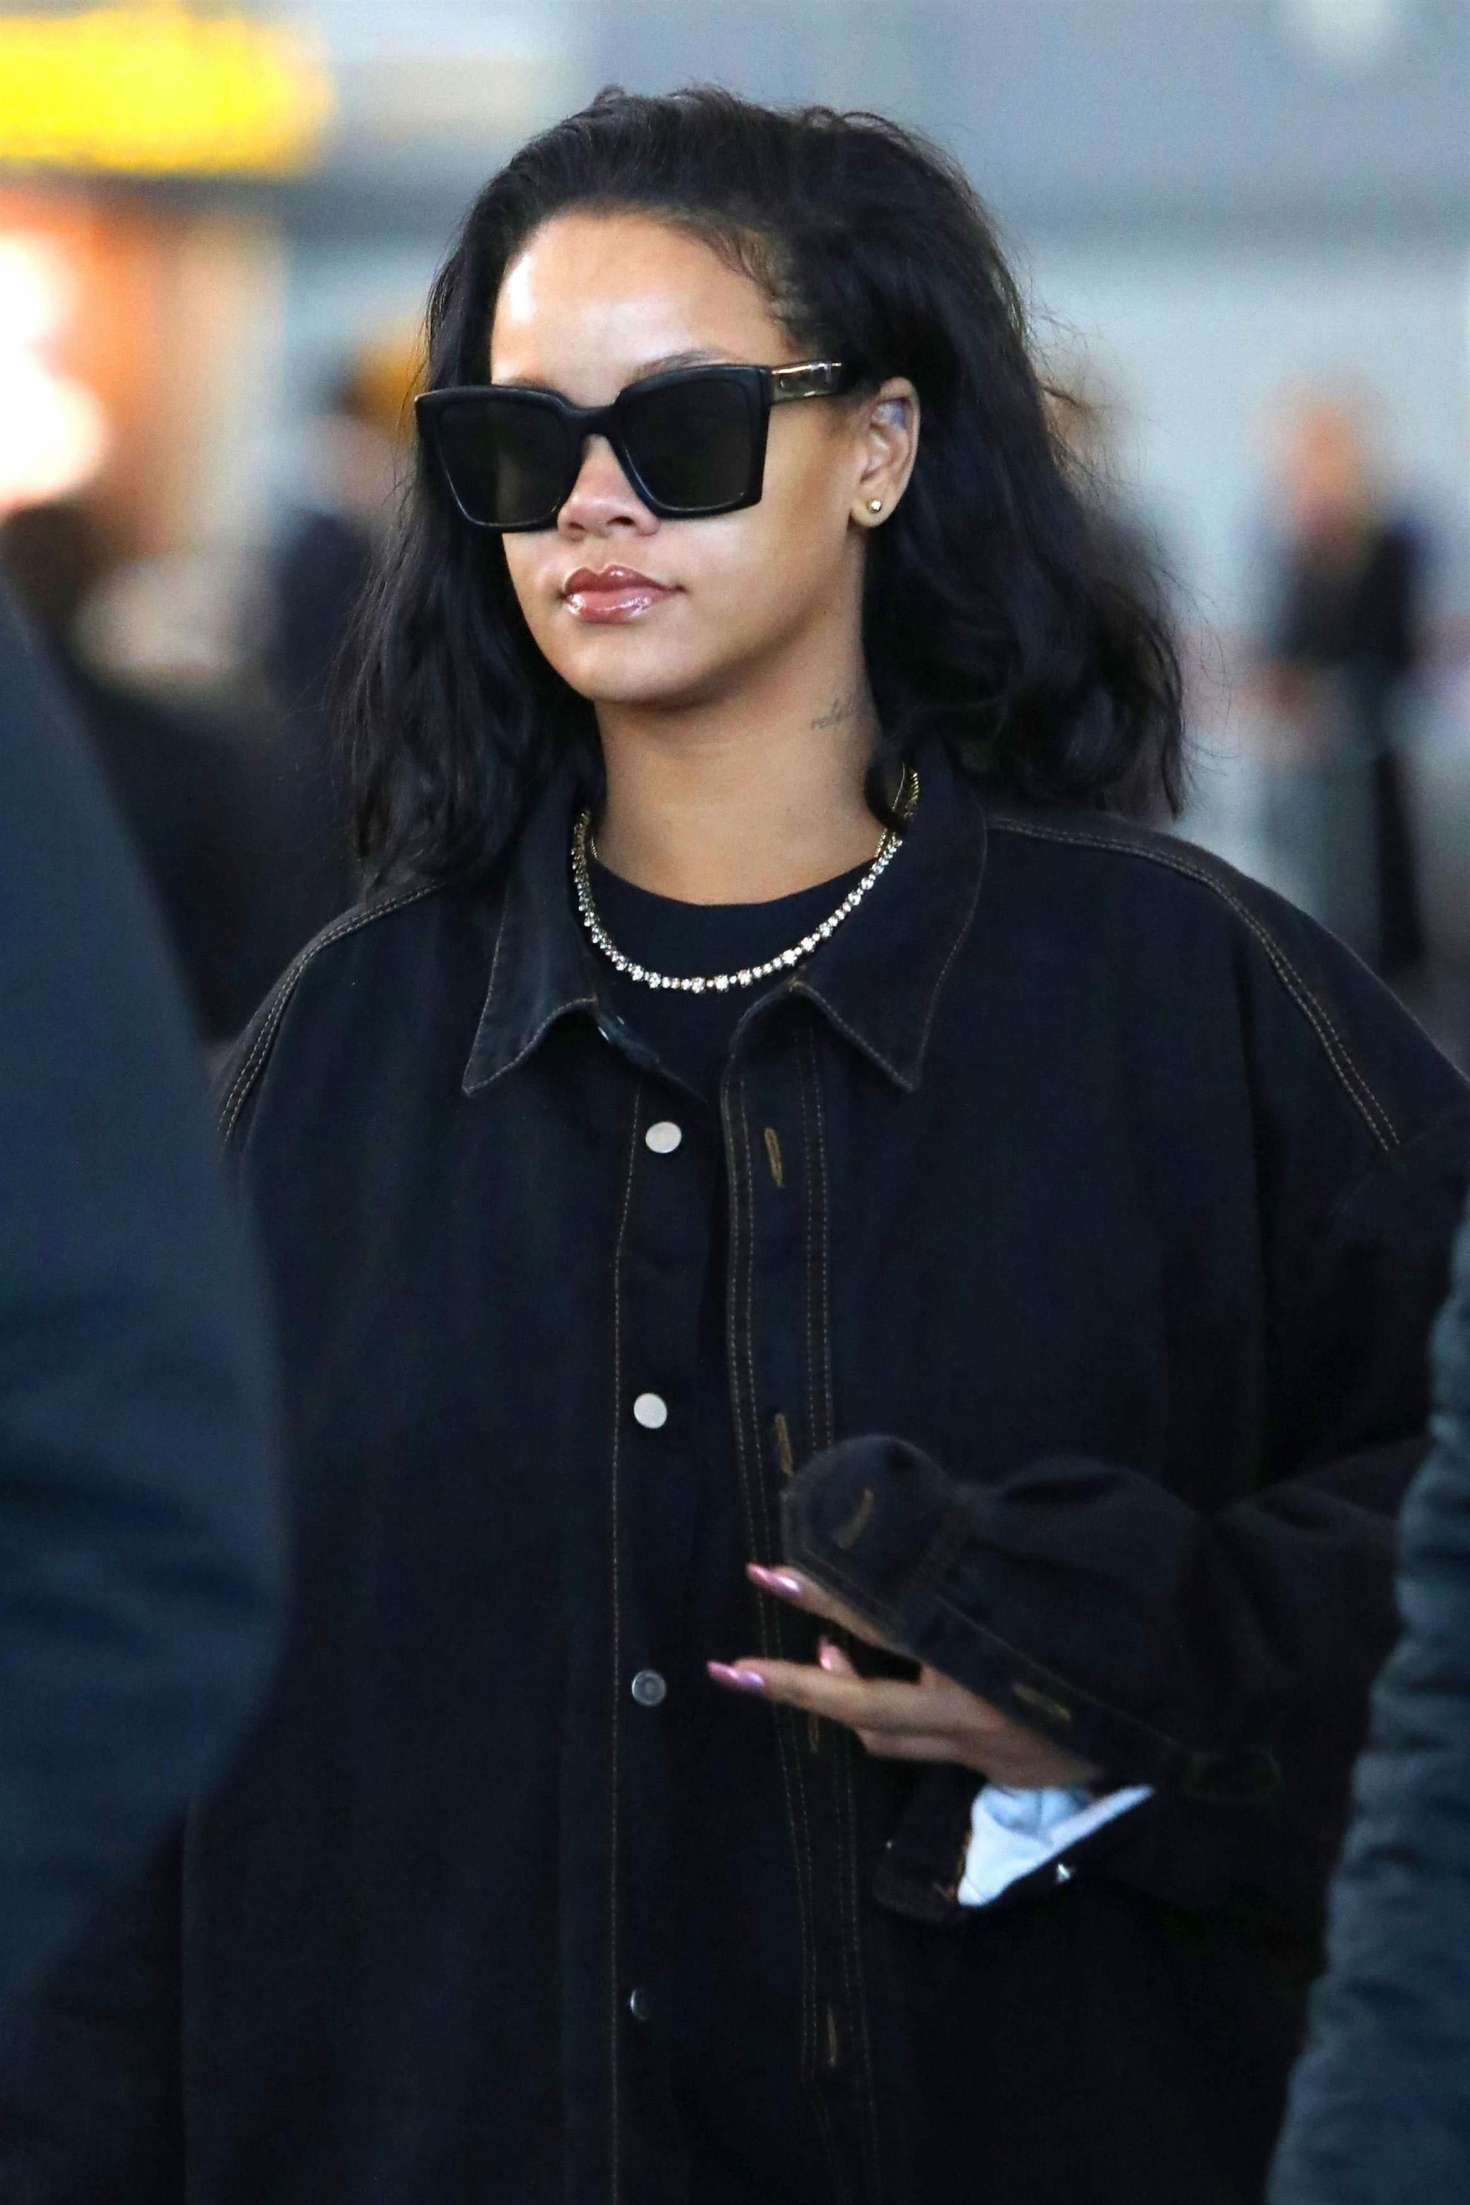 Rihanna â€“ Arriving at JFK Airport in NYC